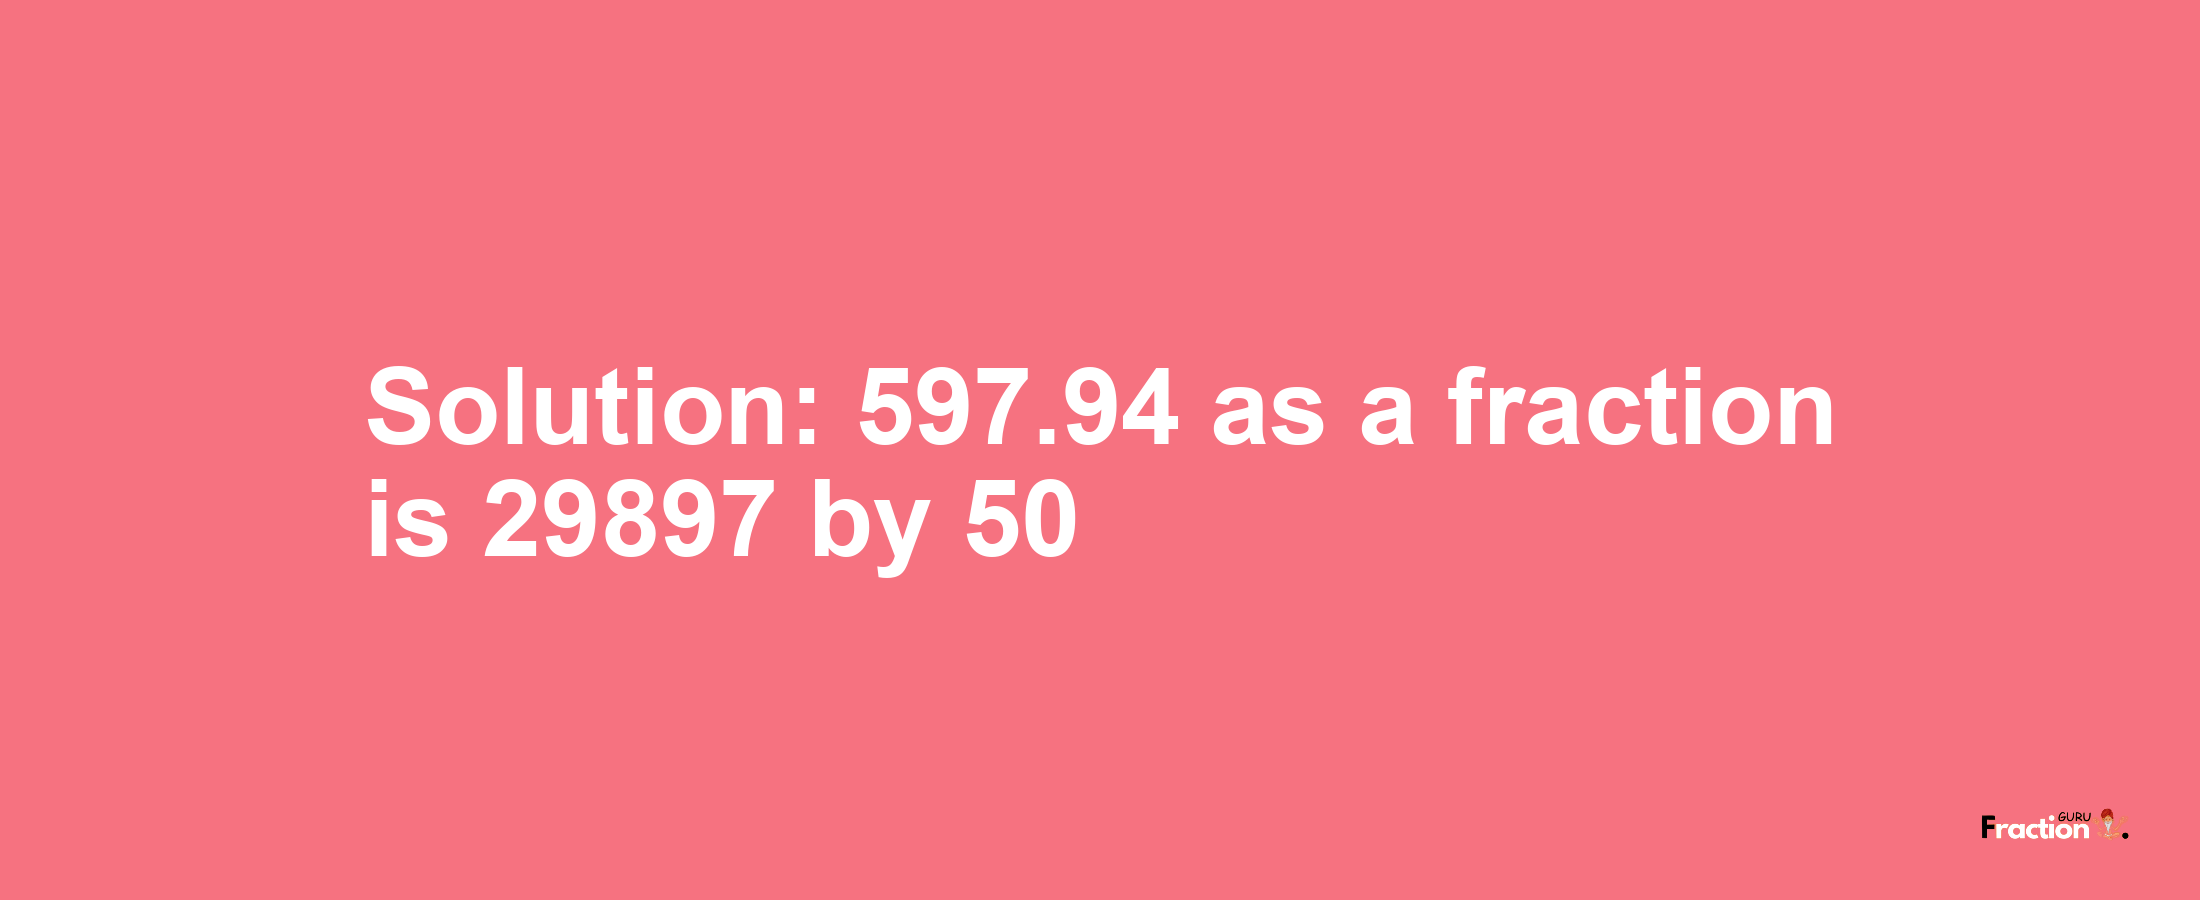 Solution:597.94 as a fraction is 29897/50